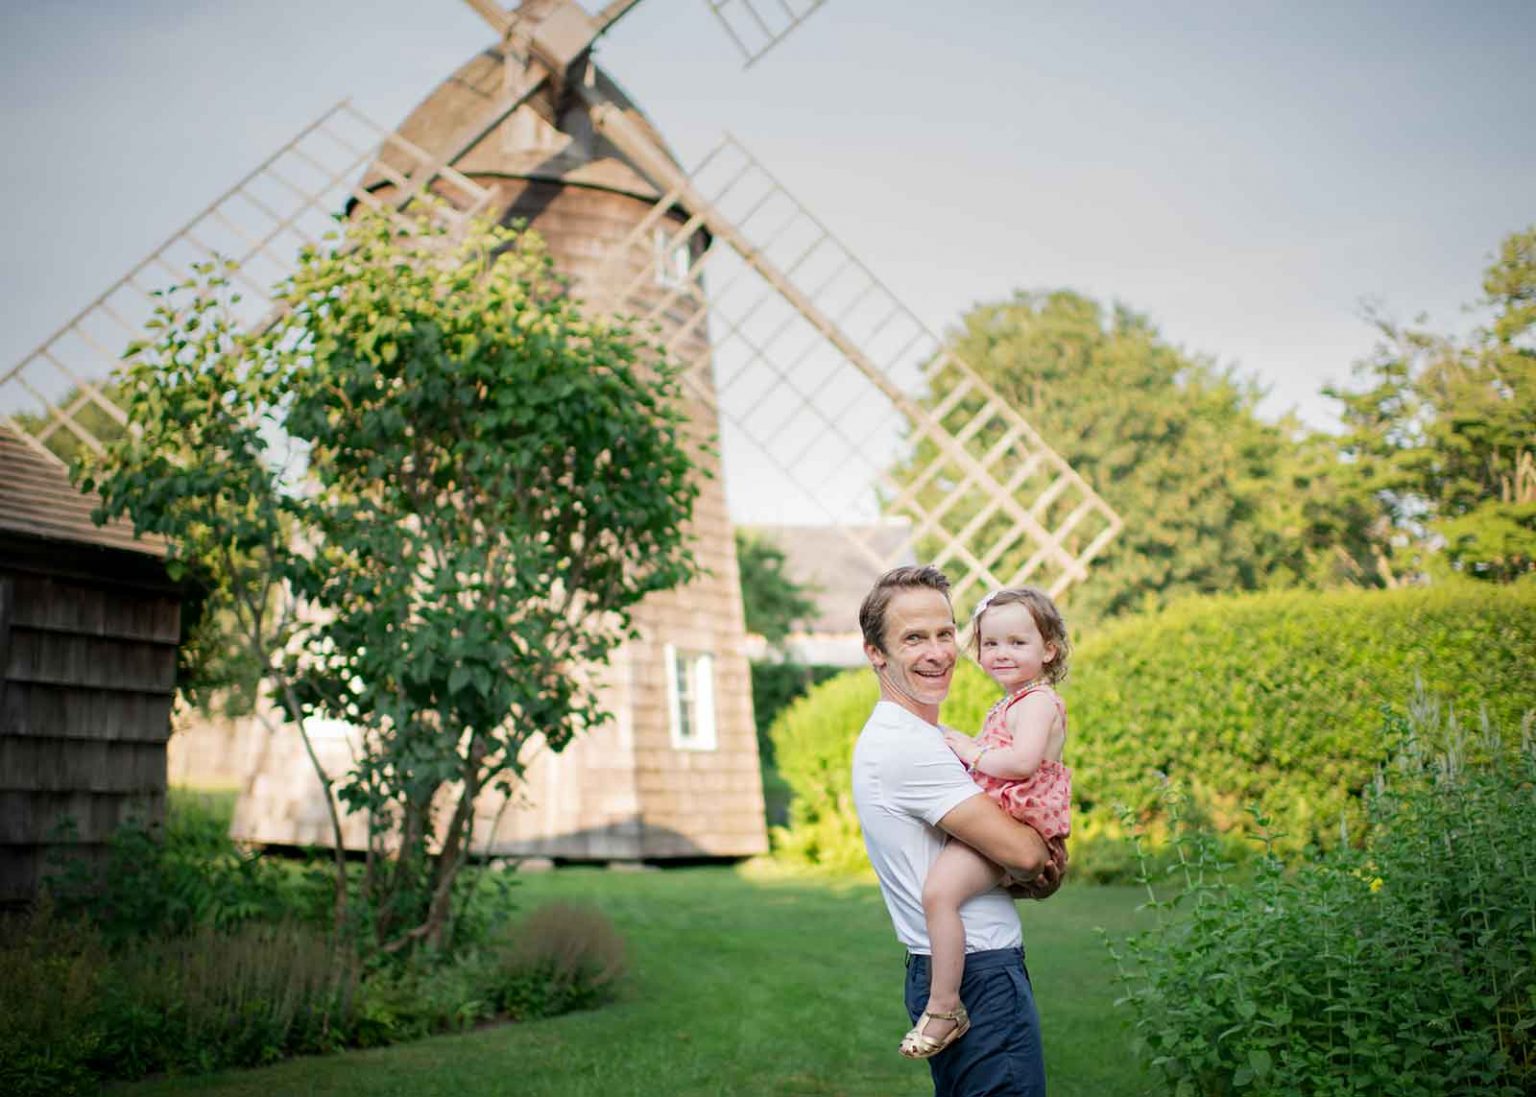 Windmill in Amagansett NY is the setting for this timeless family photo